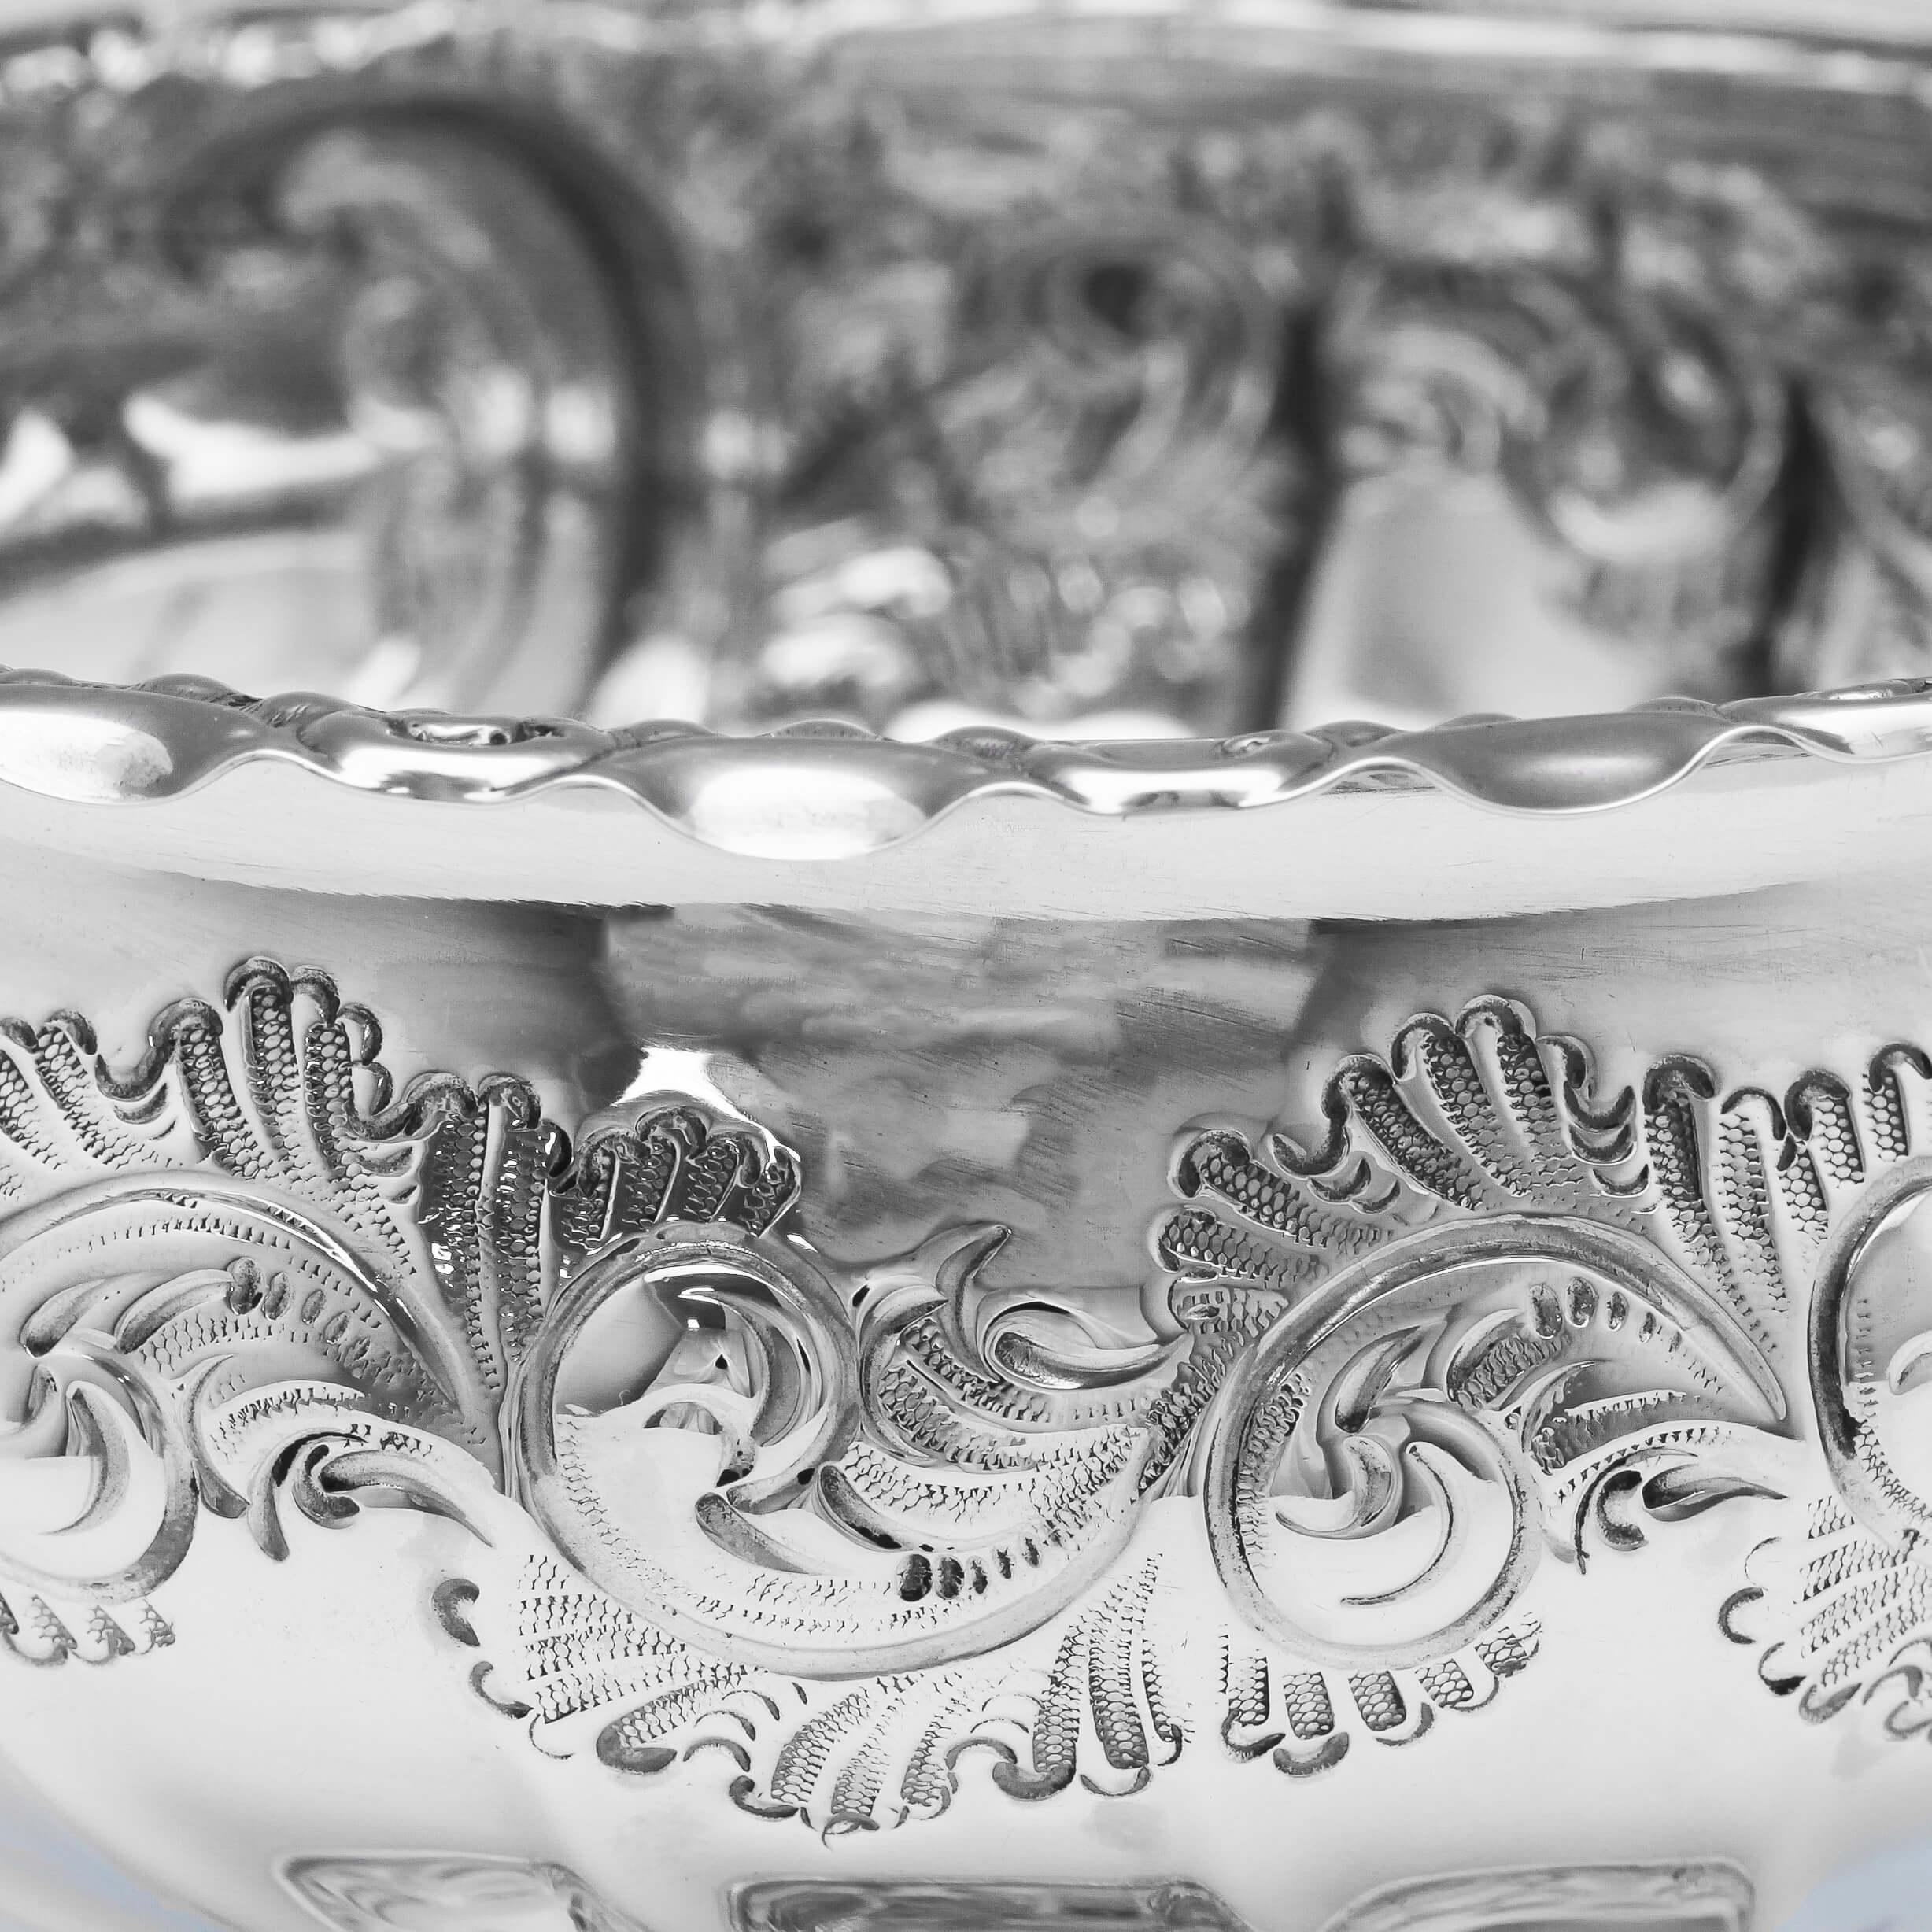 Rococo Ornate Chased Tulip Shaped Sterling Silver Bowl from 1902